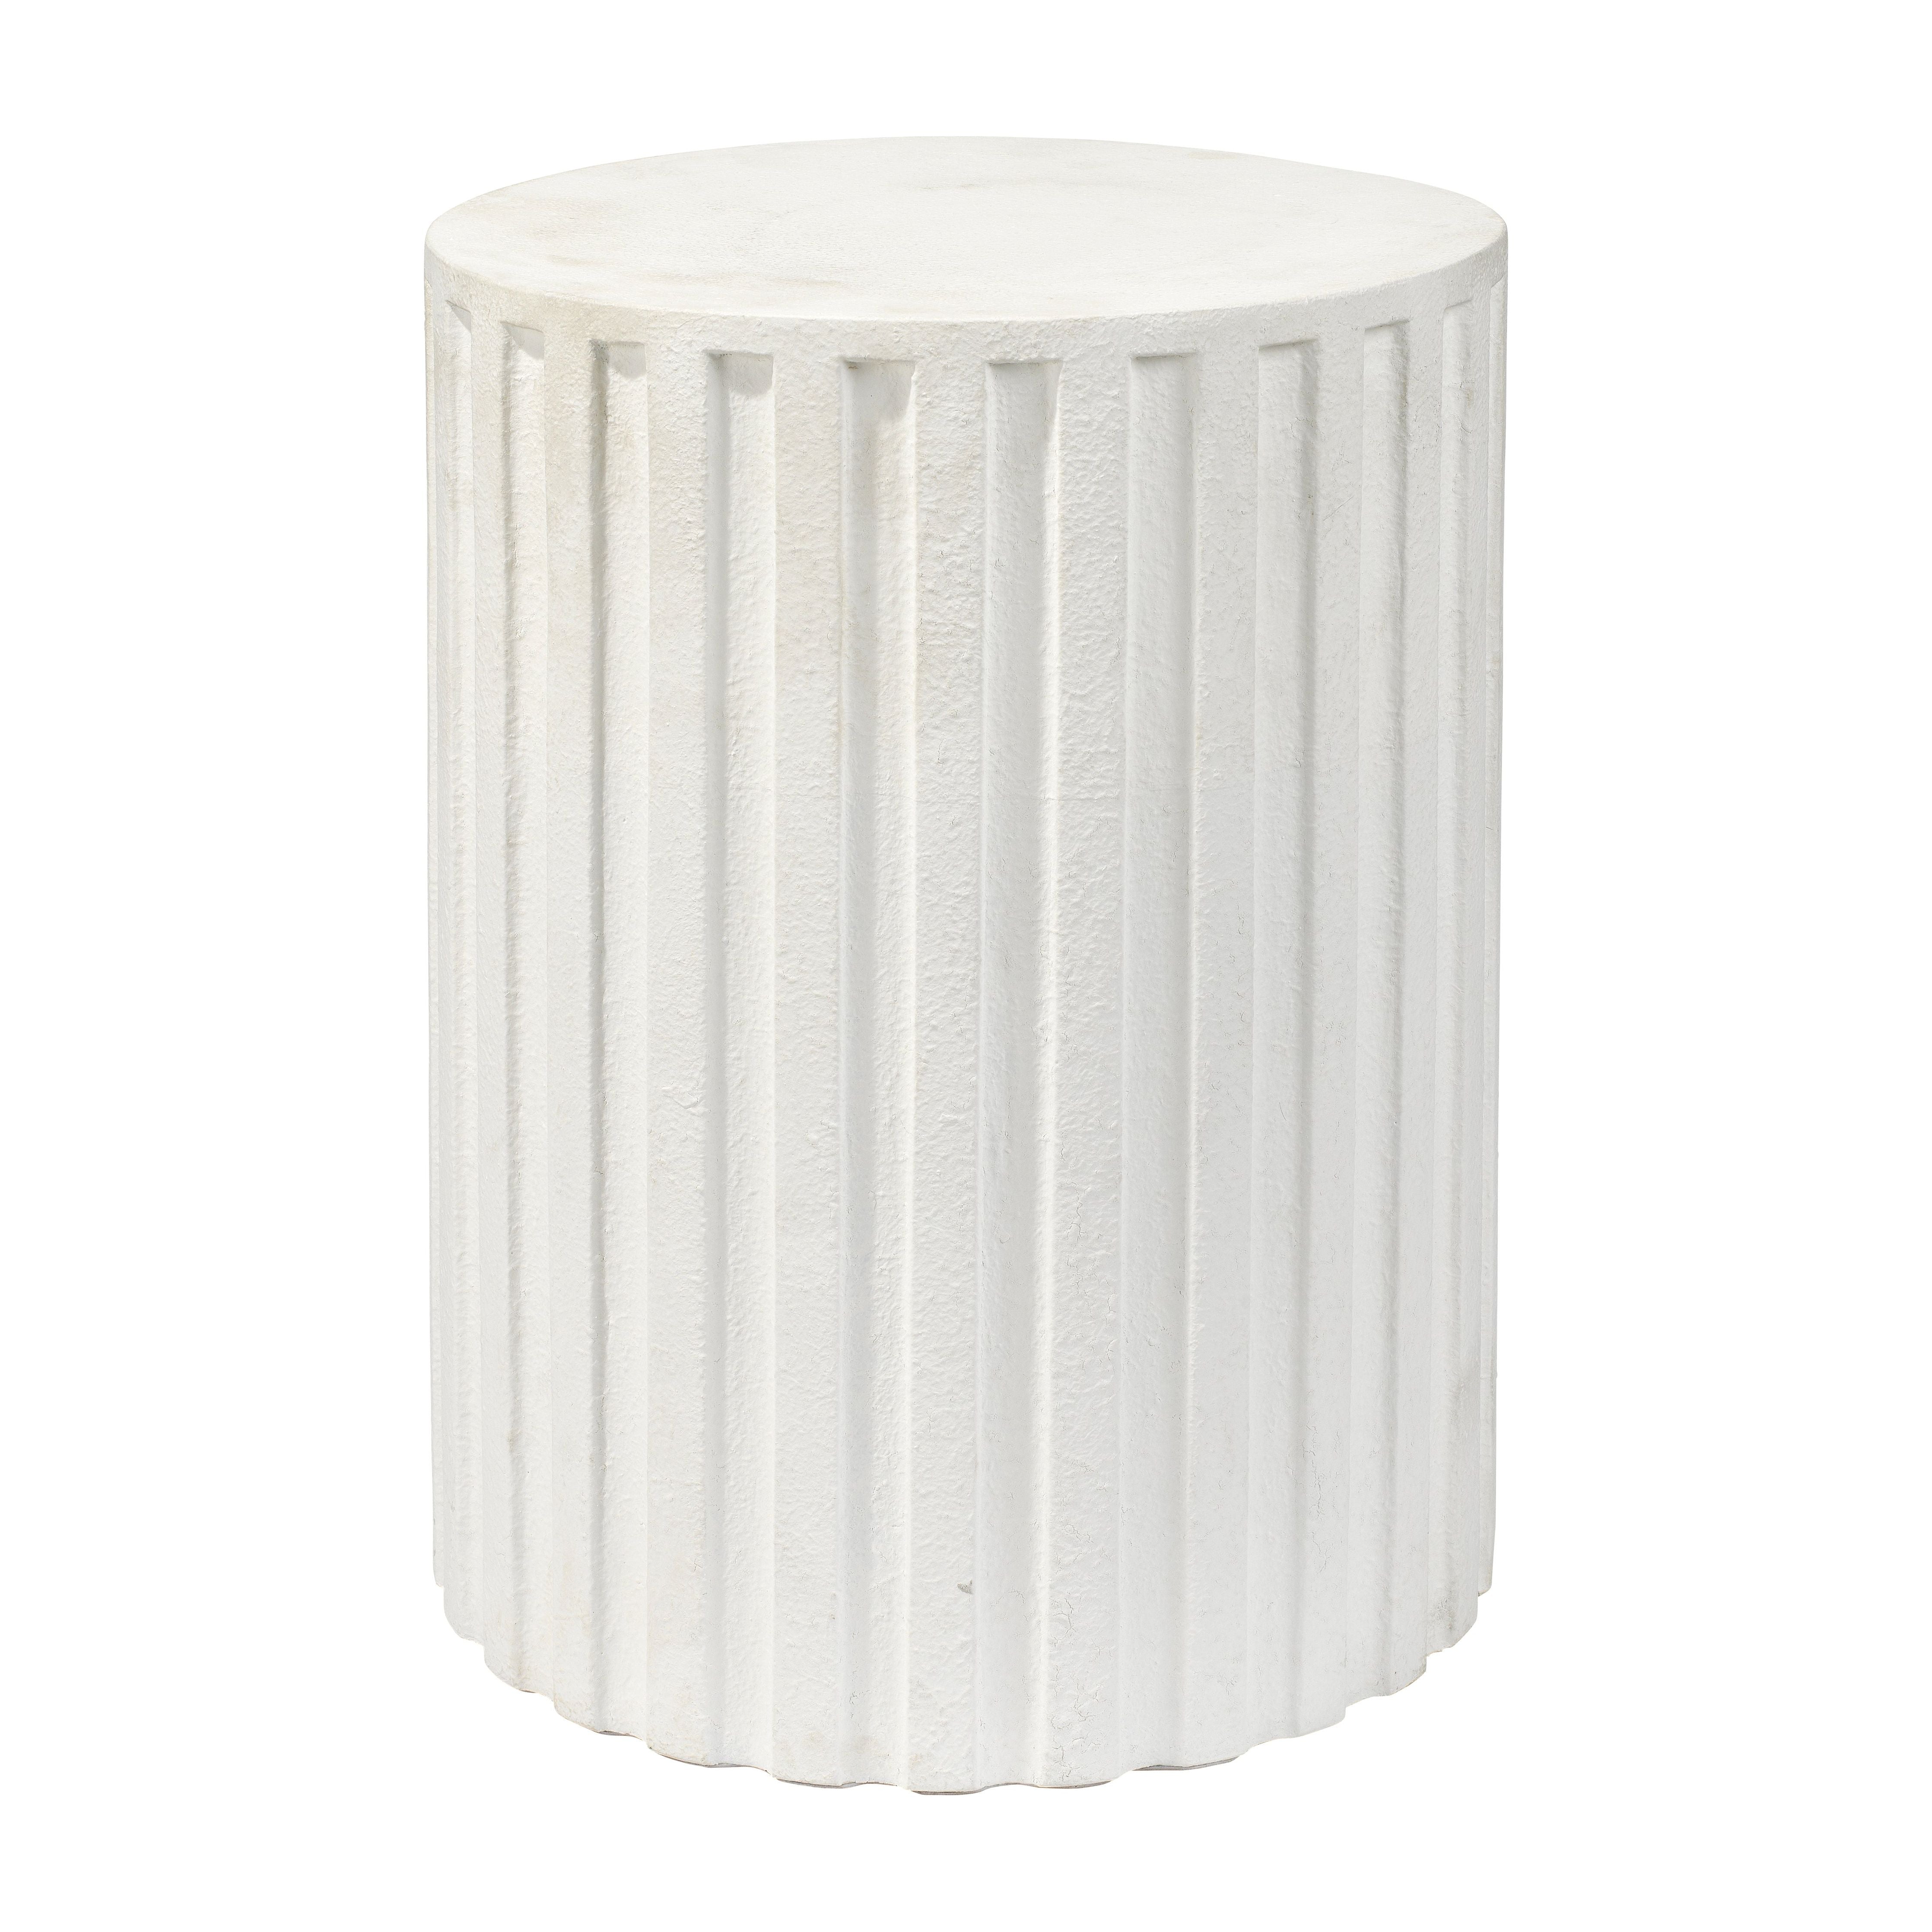 Jamie Young Company - 20FLUT-STWH - Fluted Column Side Table - Fluted - White